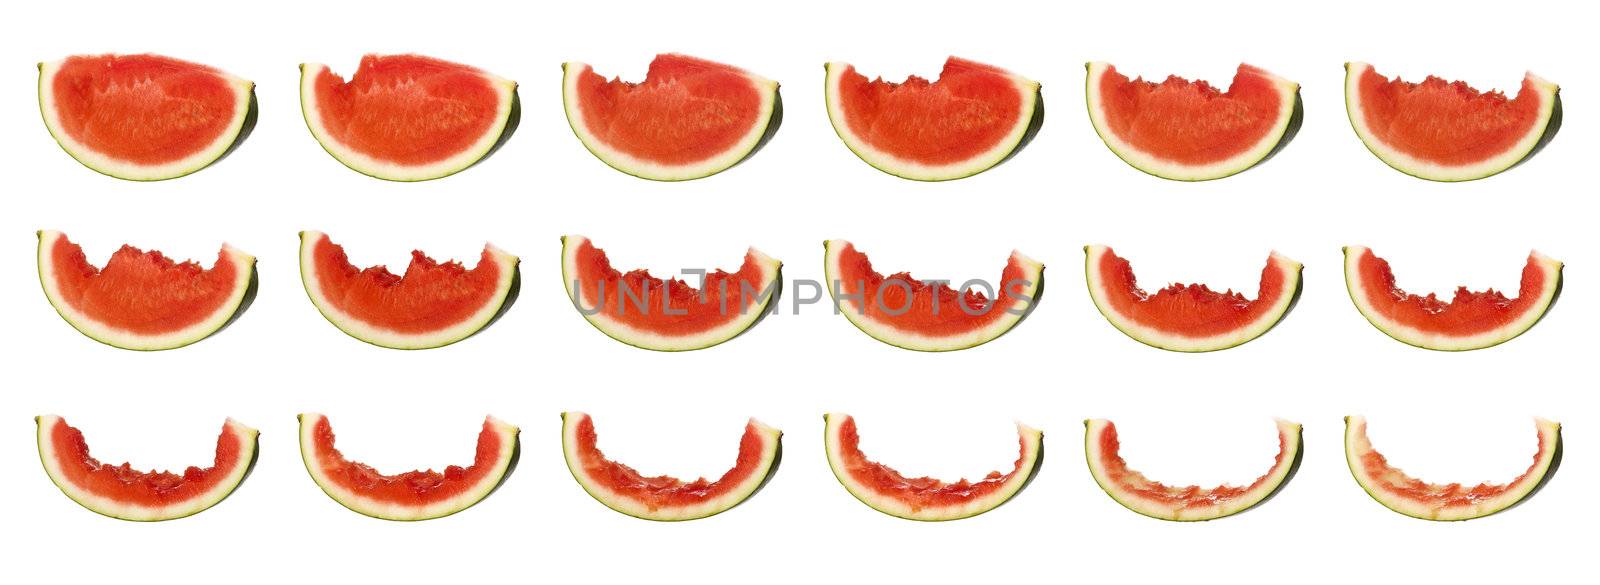 Tasty watermelon in progress isolated on white background